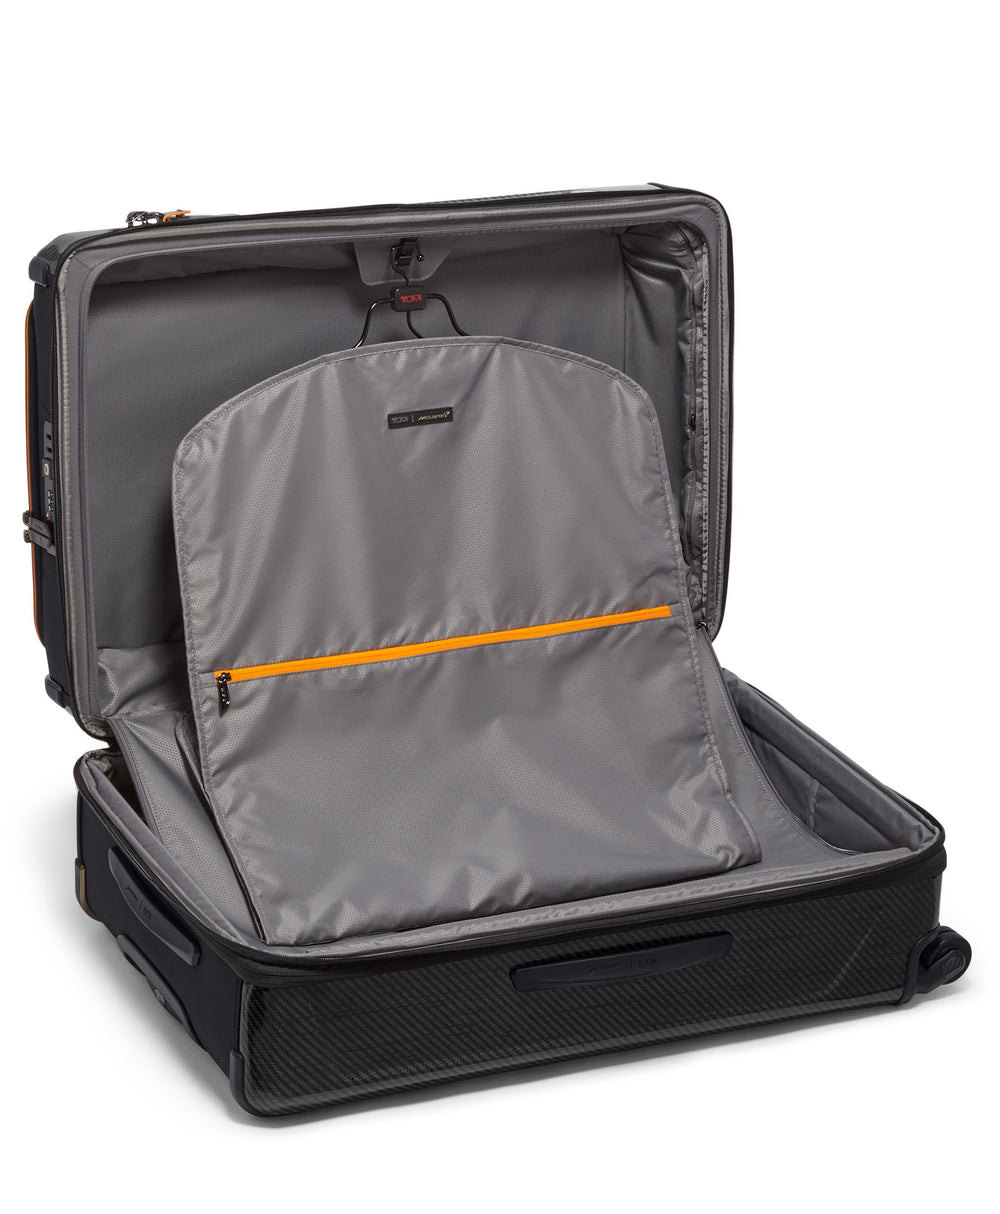 Aero Extended Trip Packing Case